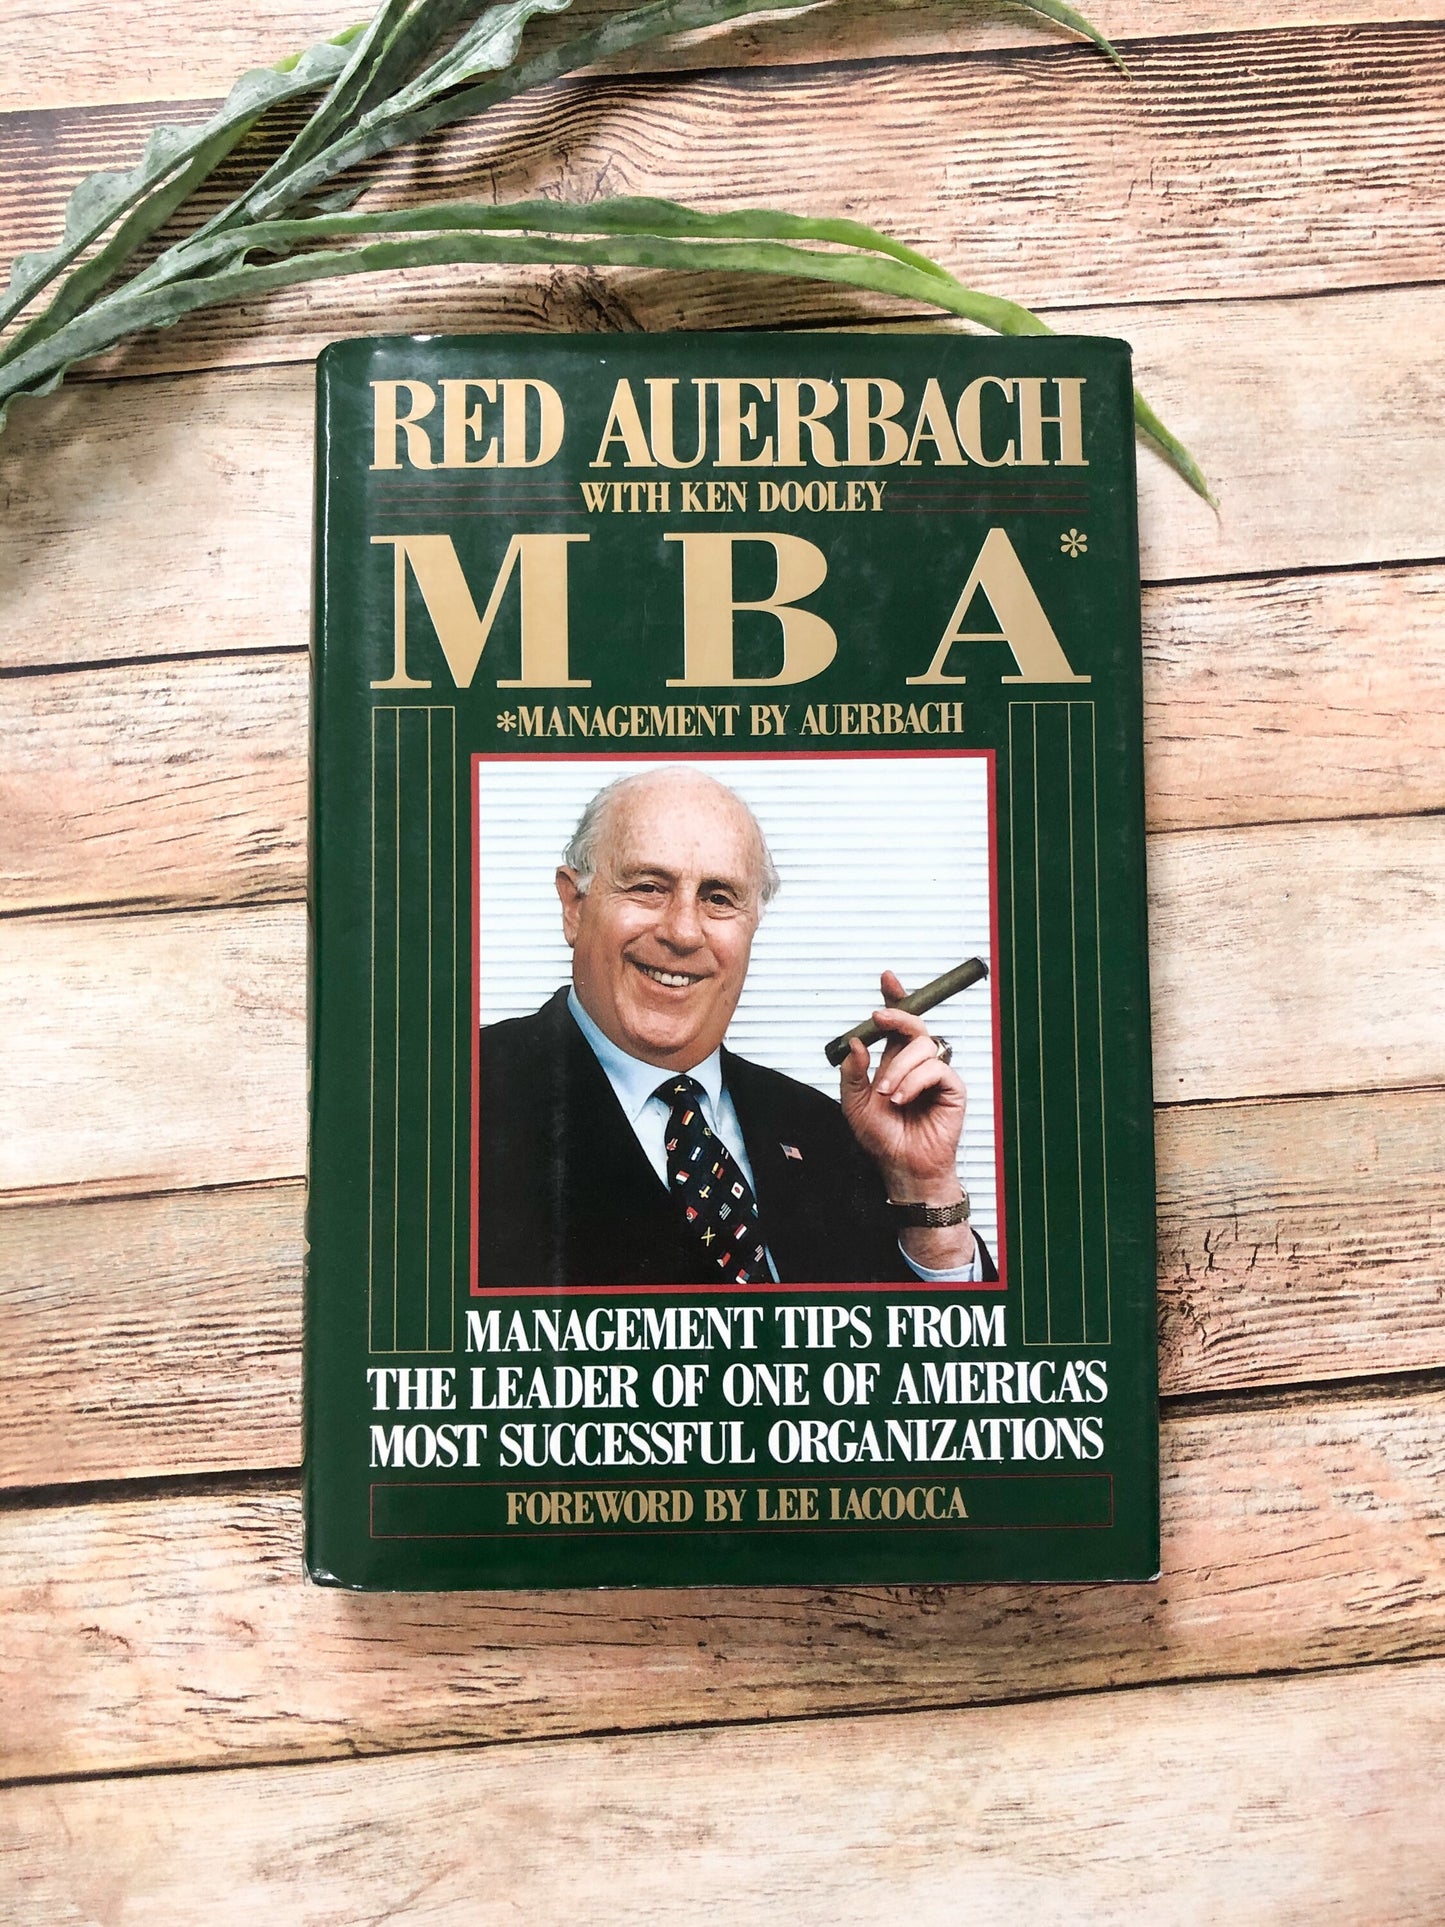 Signed by Red Averback / MBA Management